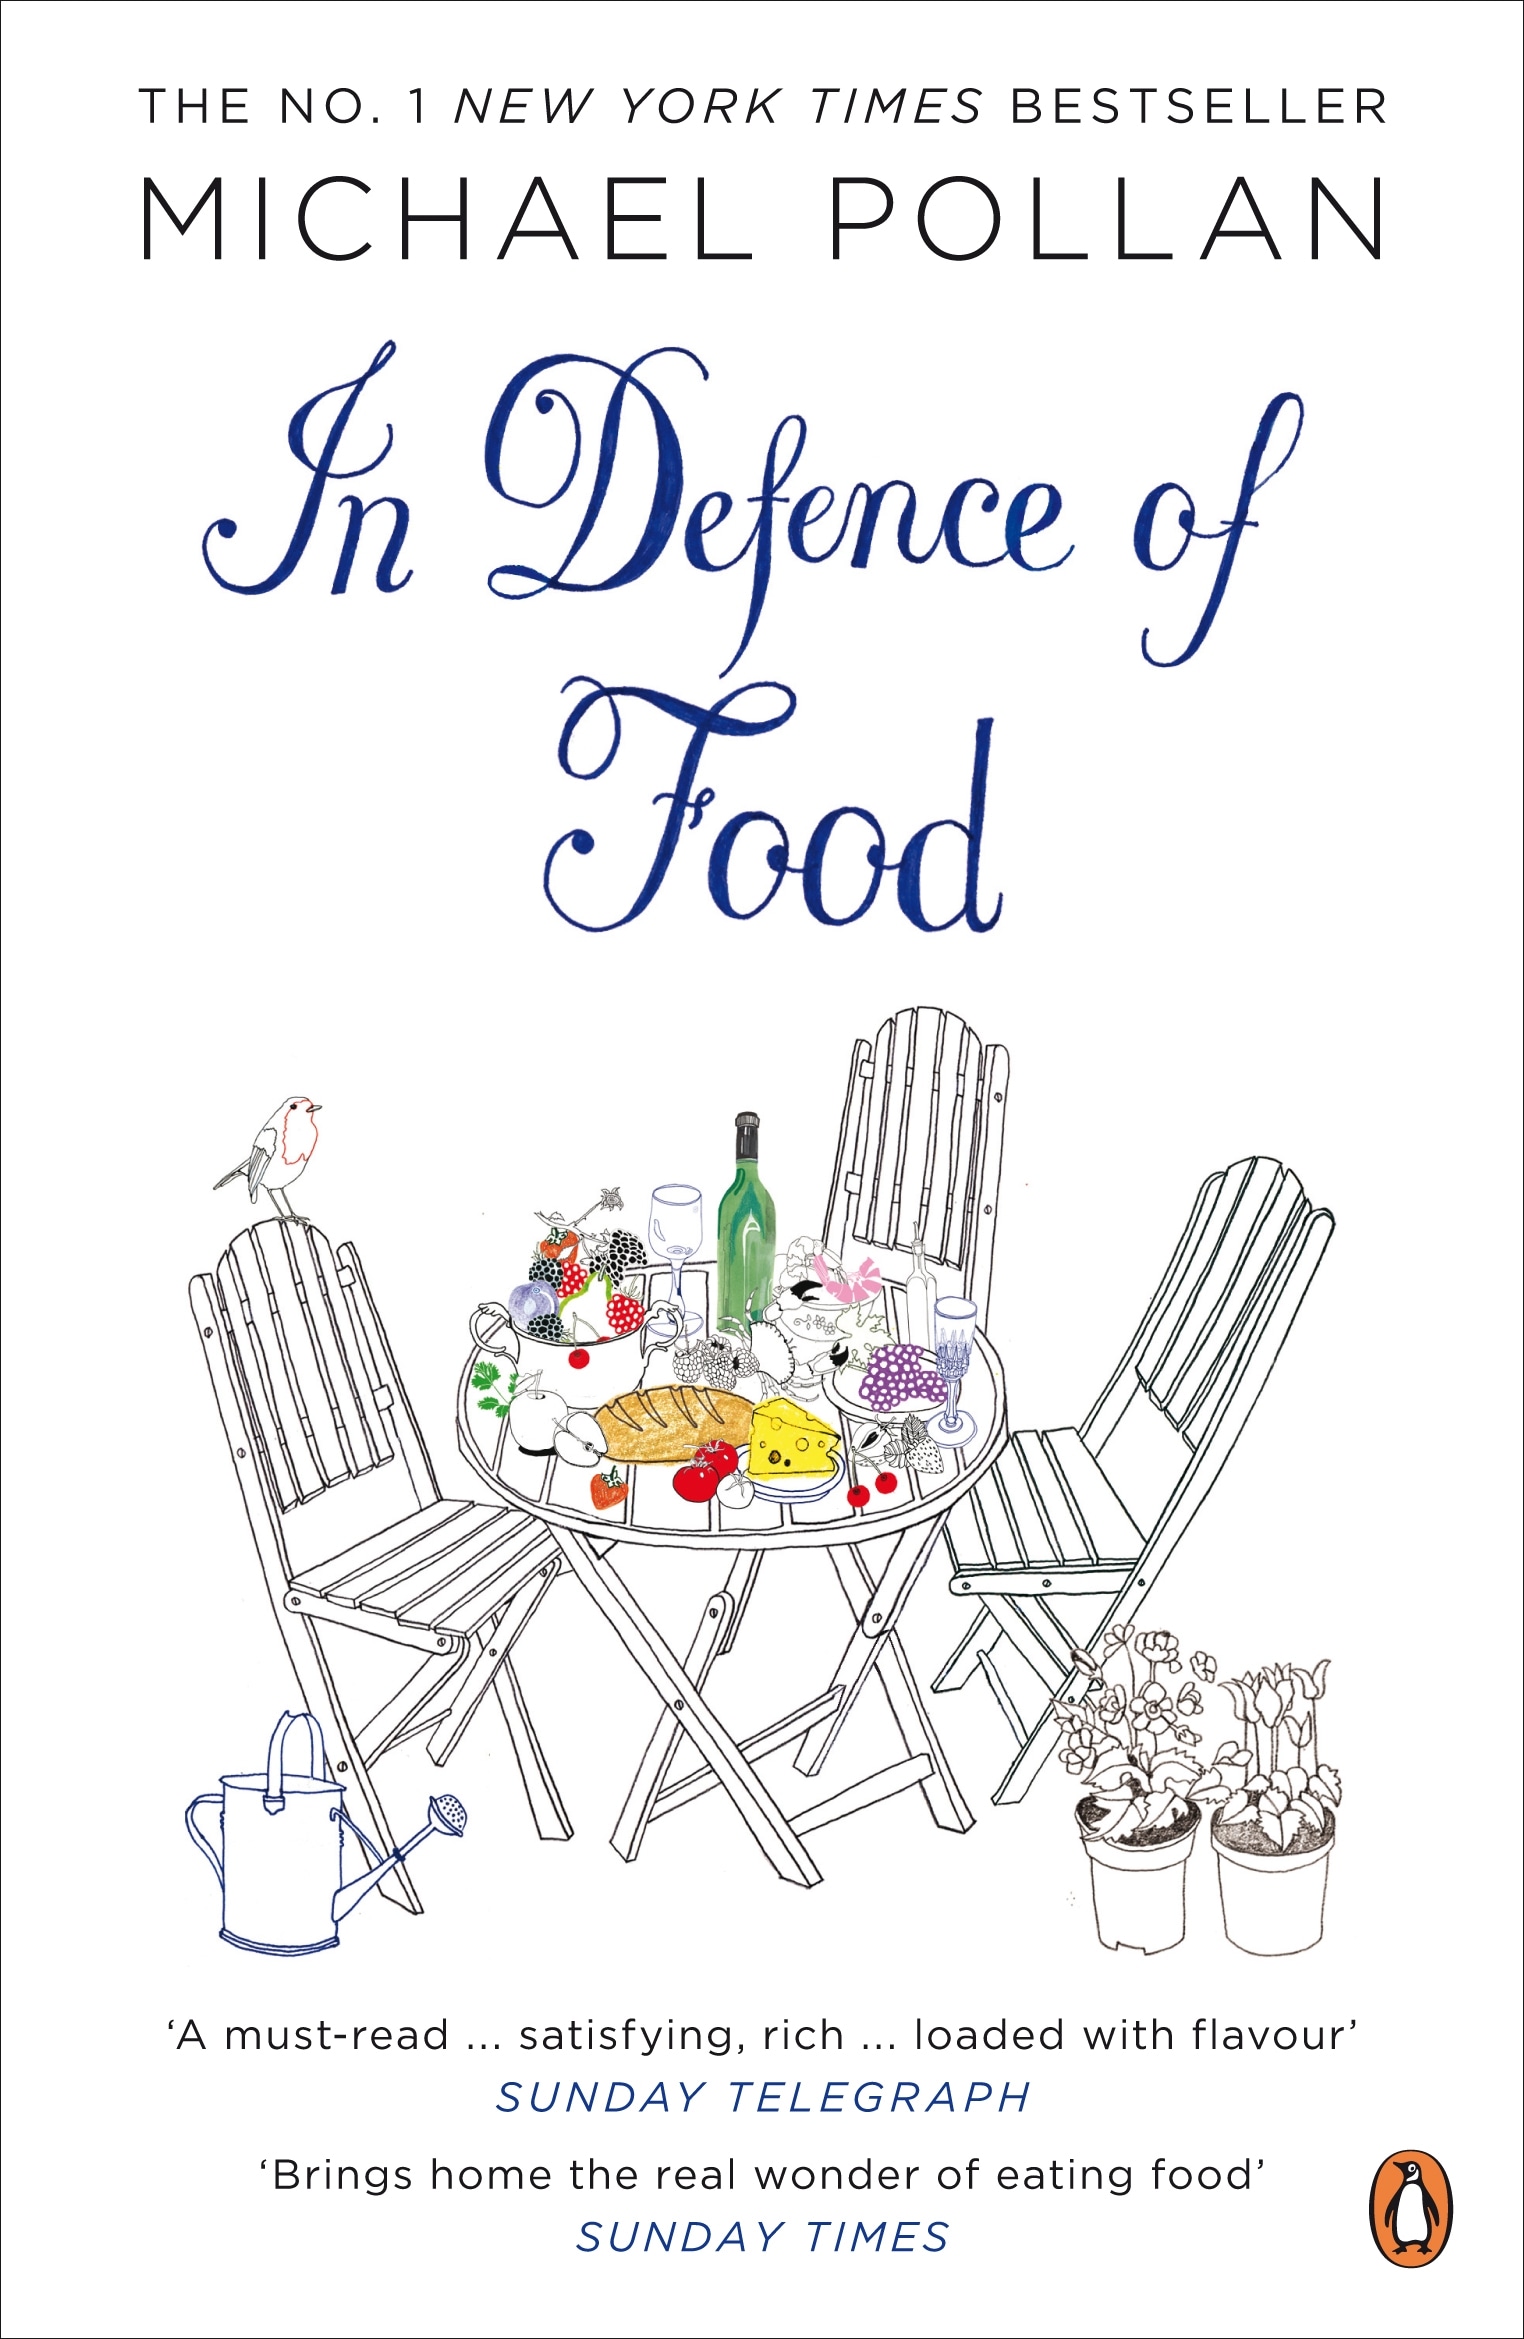 Book “In Defence of Food” by Michael Pollan — May 7, 2009